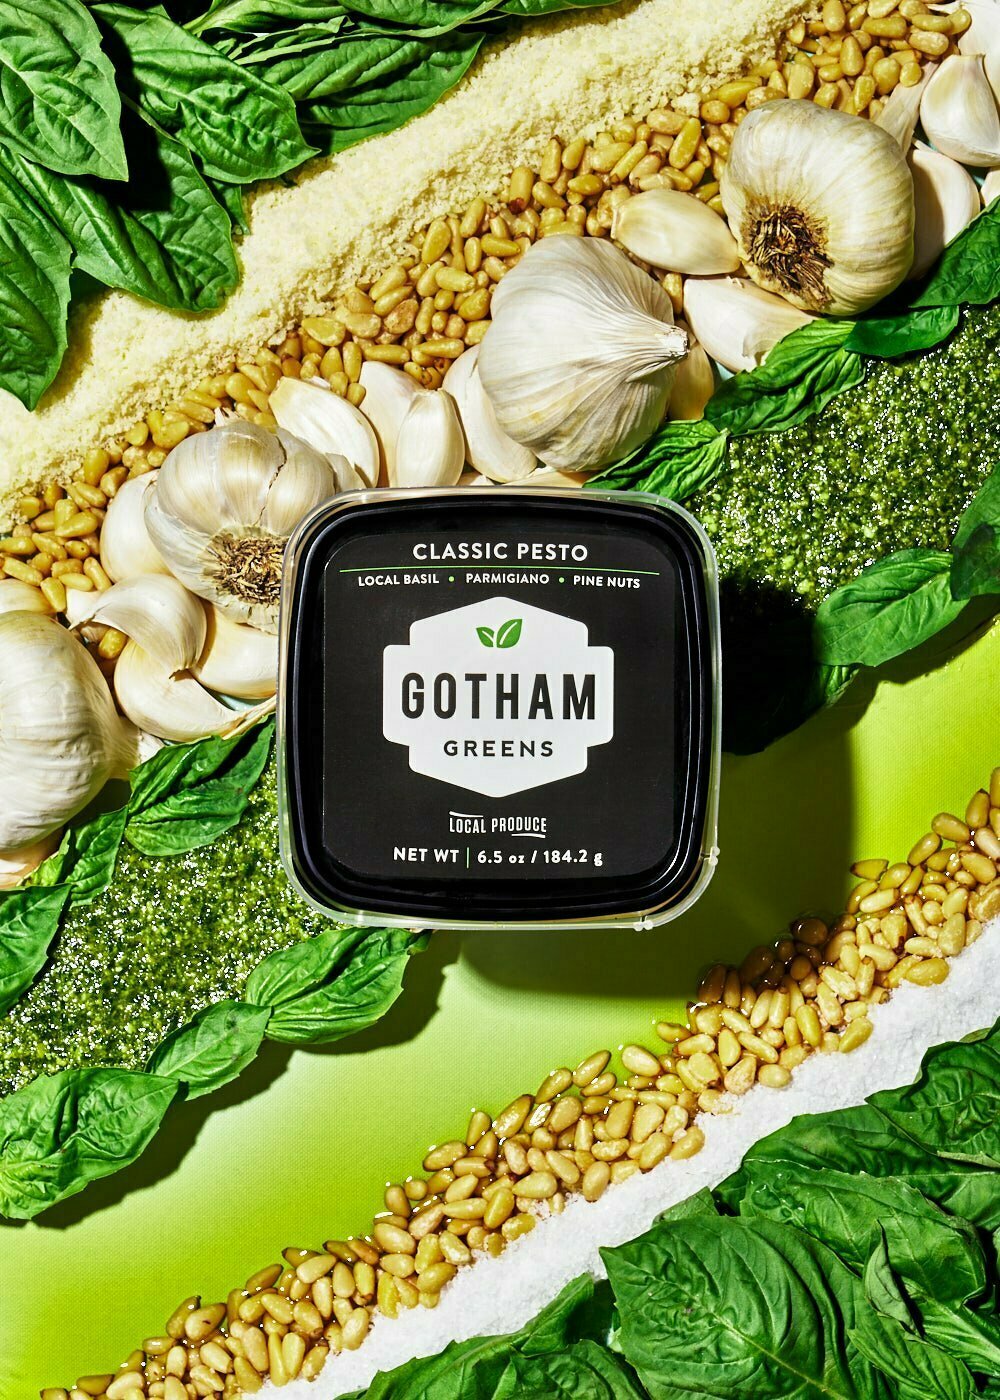 Gotham Greens Classic Pesto sits above a background of basil, parmesan, pine nuts, whole and garlic cloves, olive oil, and salt. Each ingredient is placed in a neat diagonal line behind the pesto.